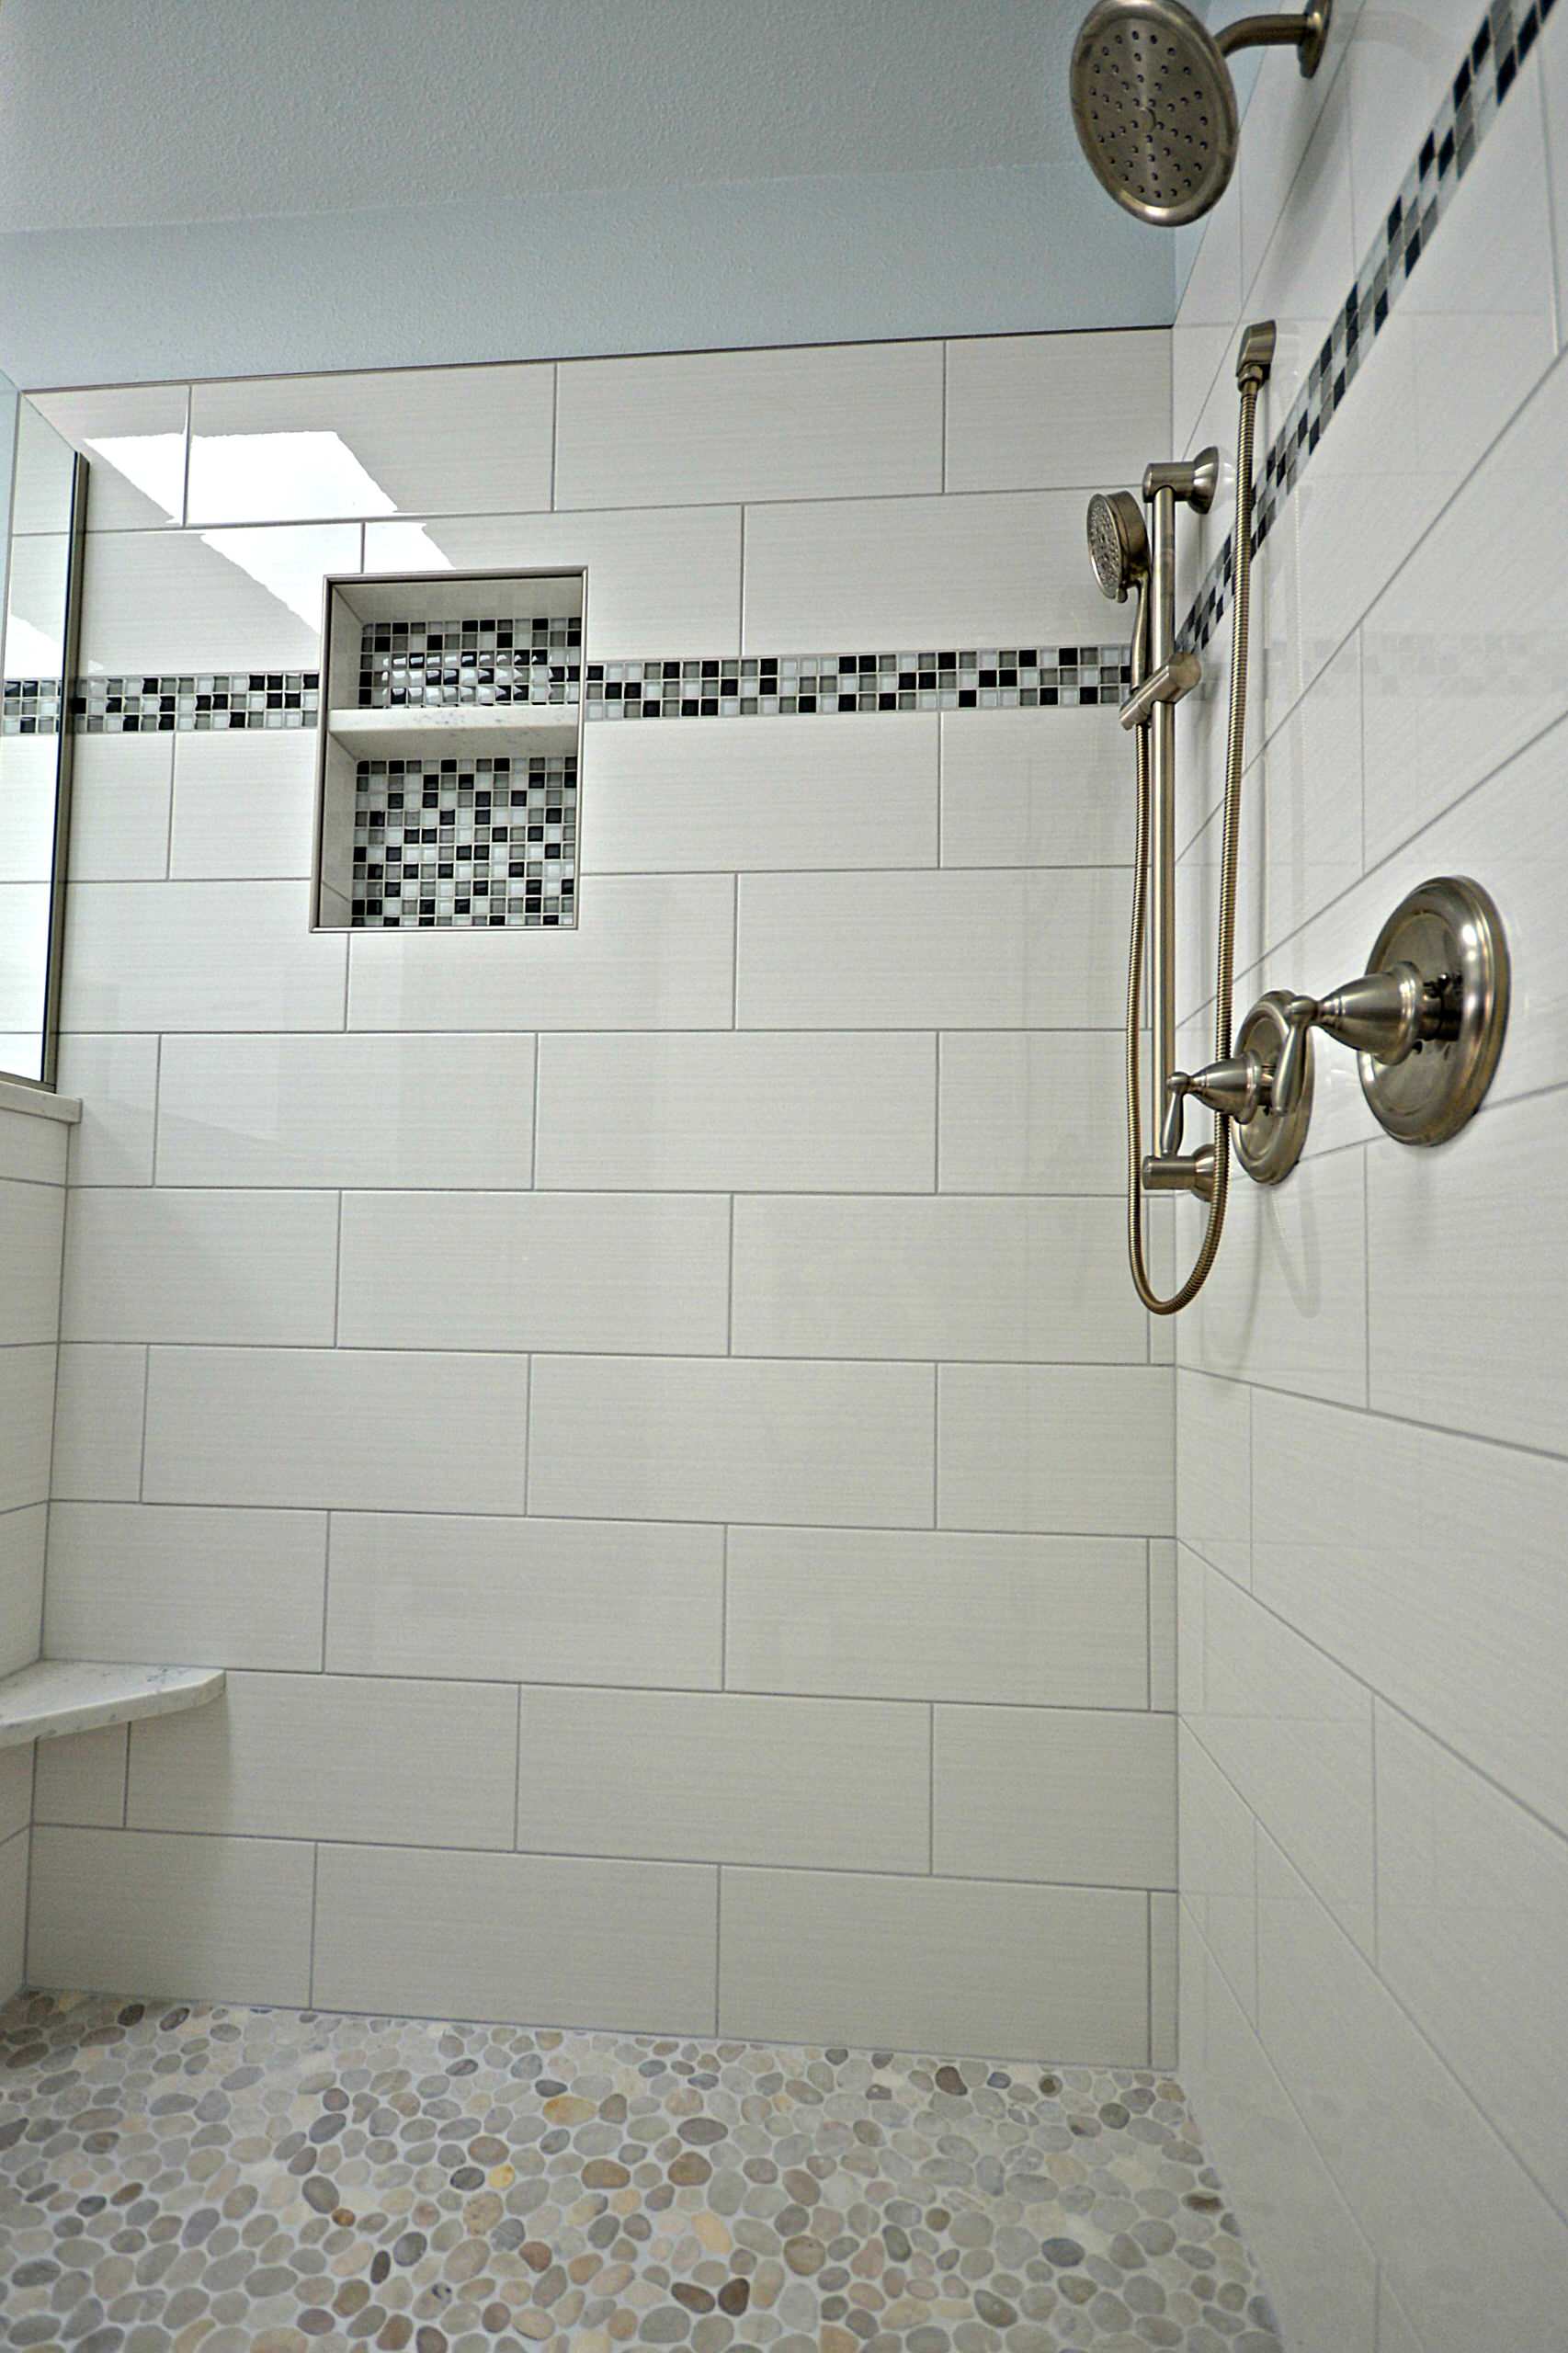 Updated tile with glass accents and glass tile niche.